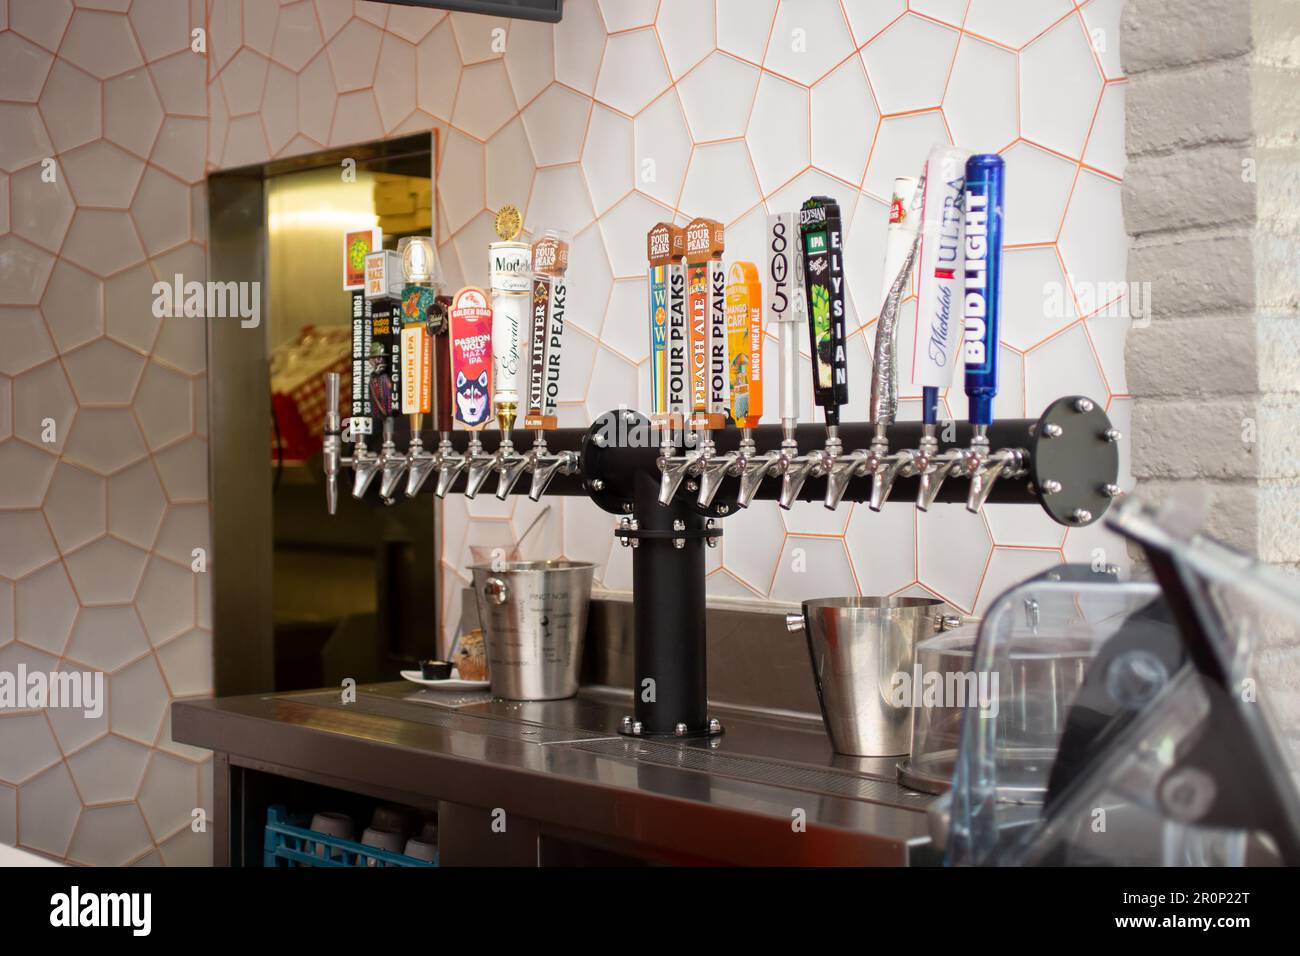 Los Angeles, California, United States - 08-24-2021: A view of several beer taps, featuring brand handles, in a brewery or restaurant setting. Stock Photo